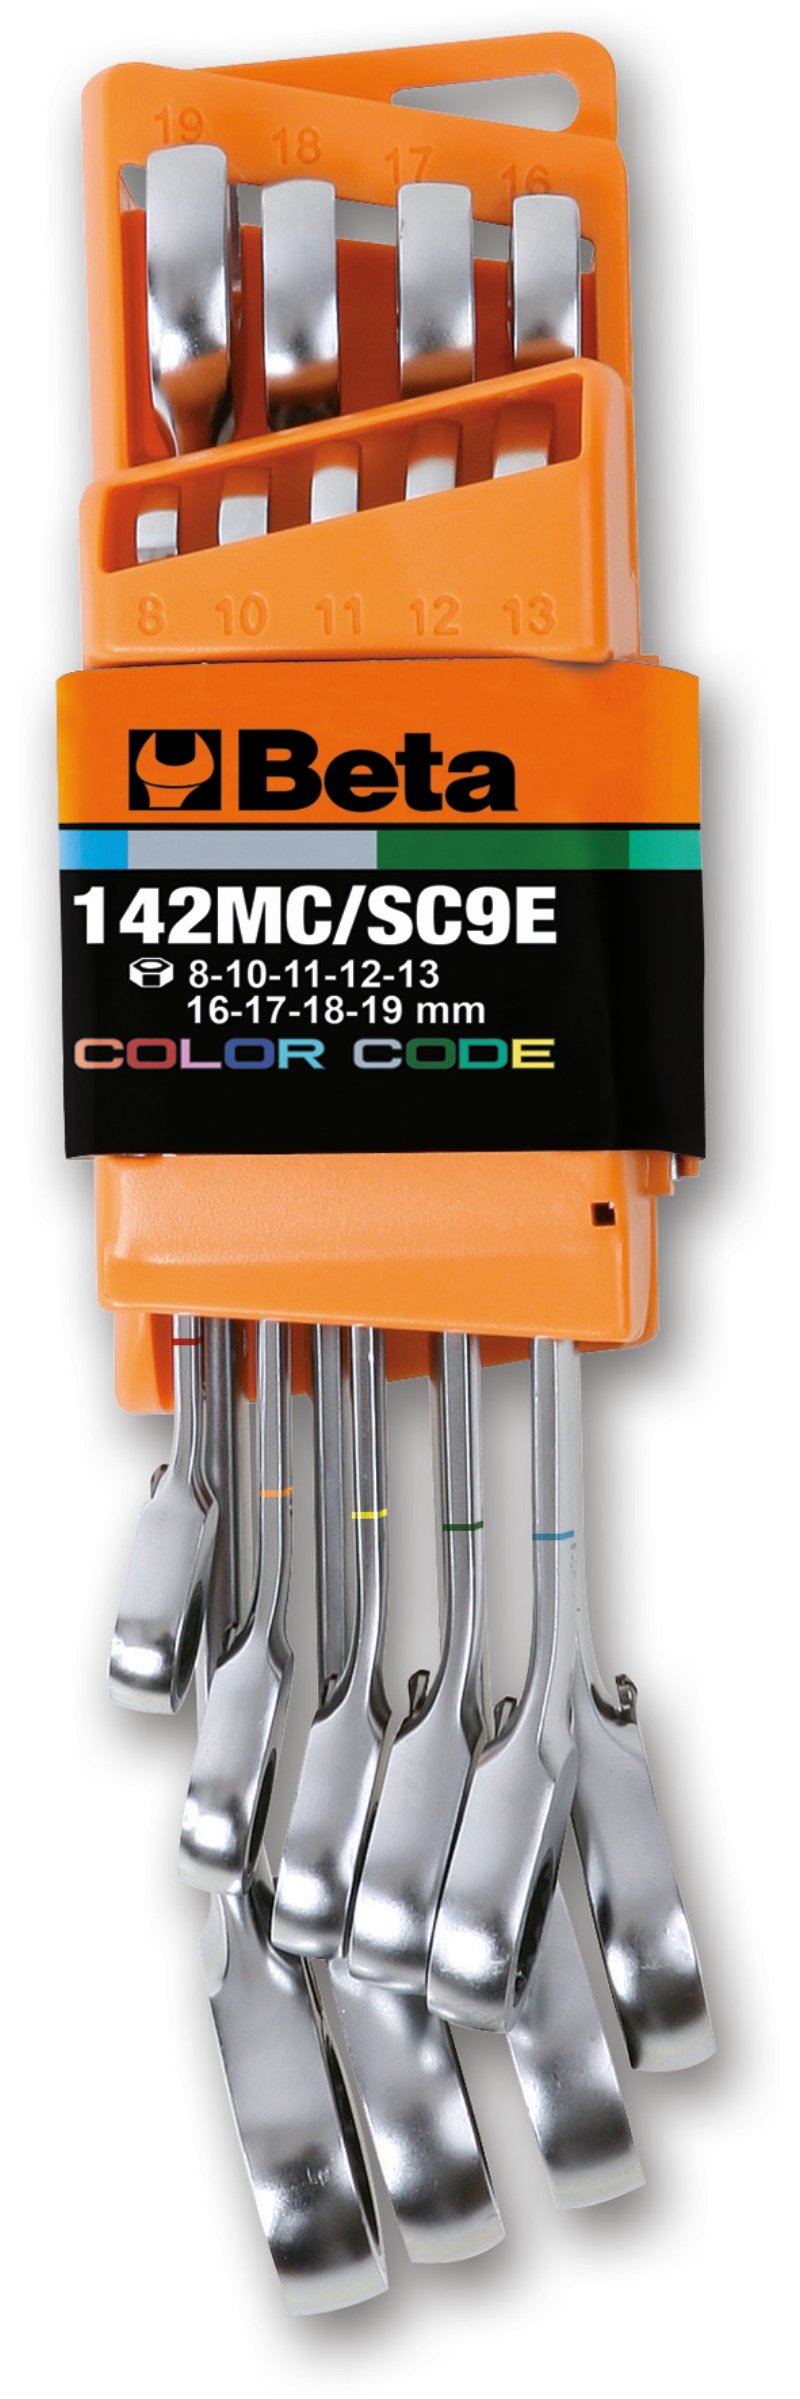 142MC/SC9I-E - Set of 9 reversible ratcheting combination wrenches, coloured, with compact support